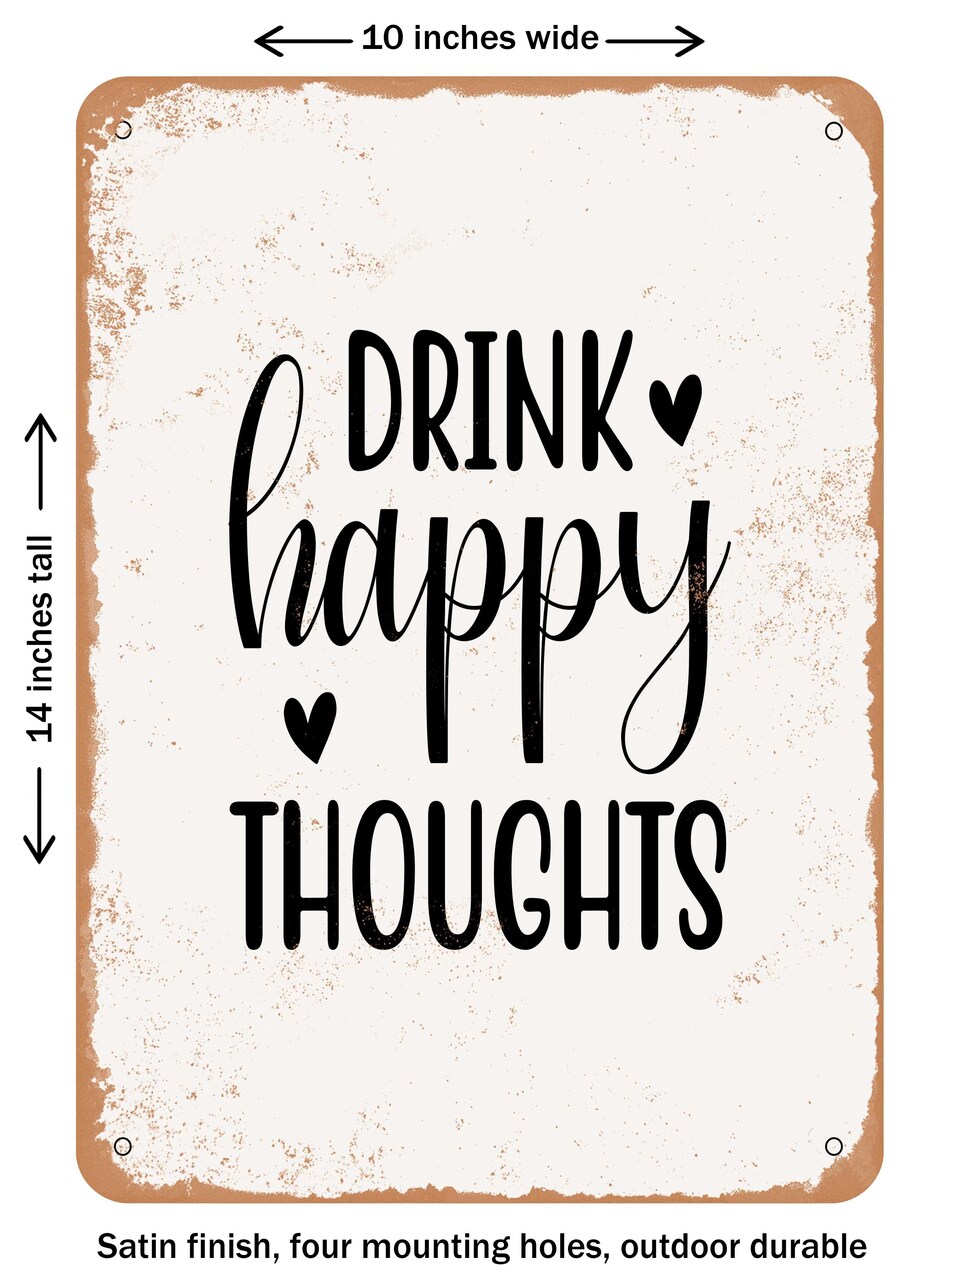 DECORATIVE METAL SIGN - Drink Happy Thoughts - 3  - Vintage Rusty Look